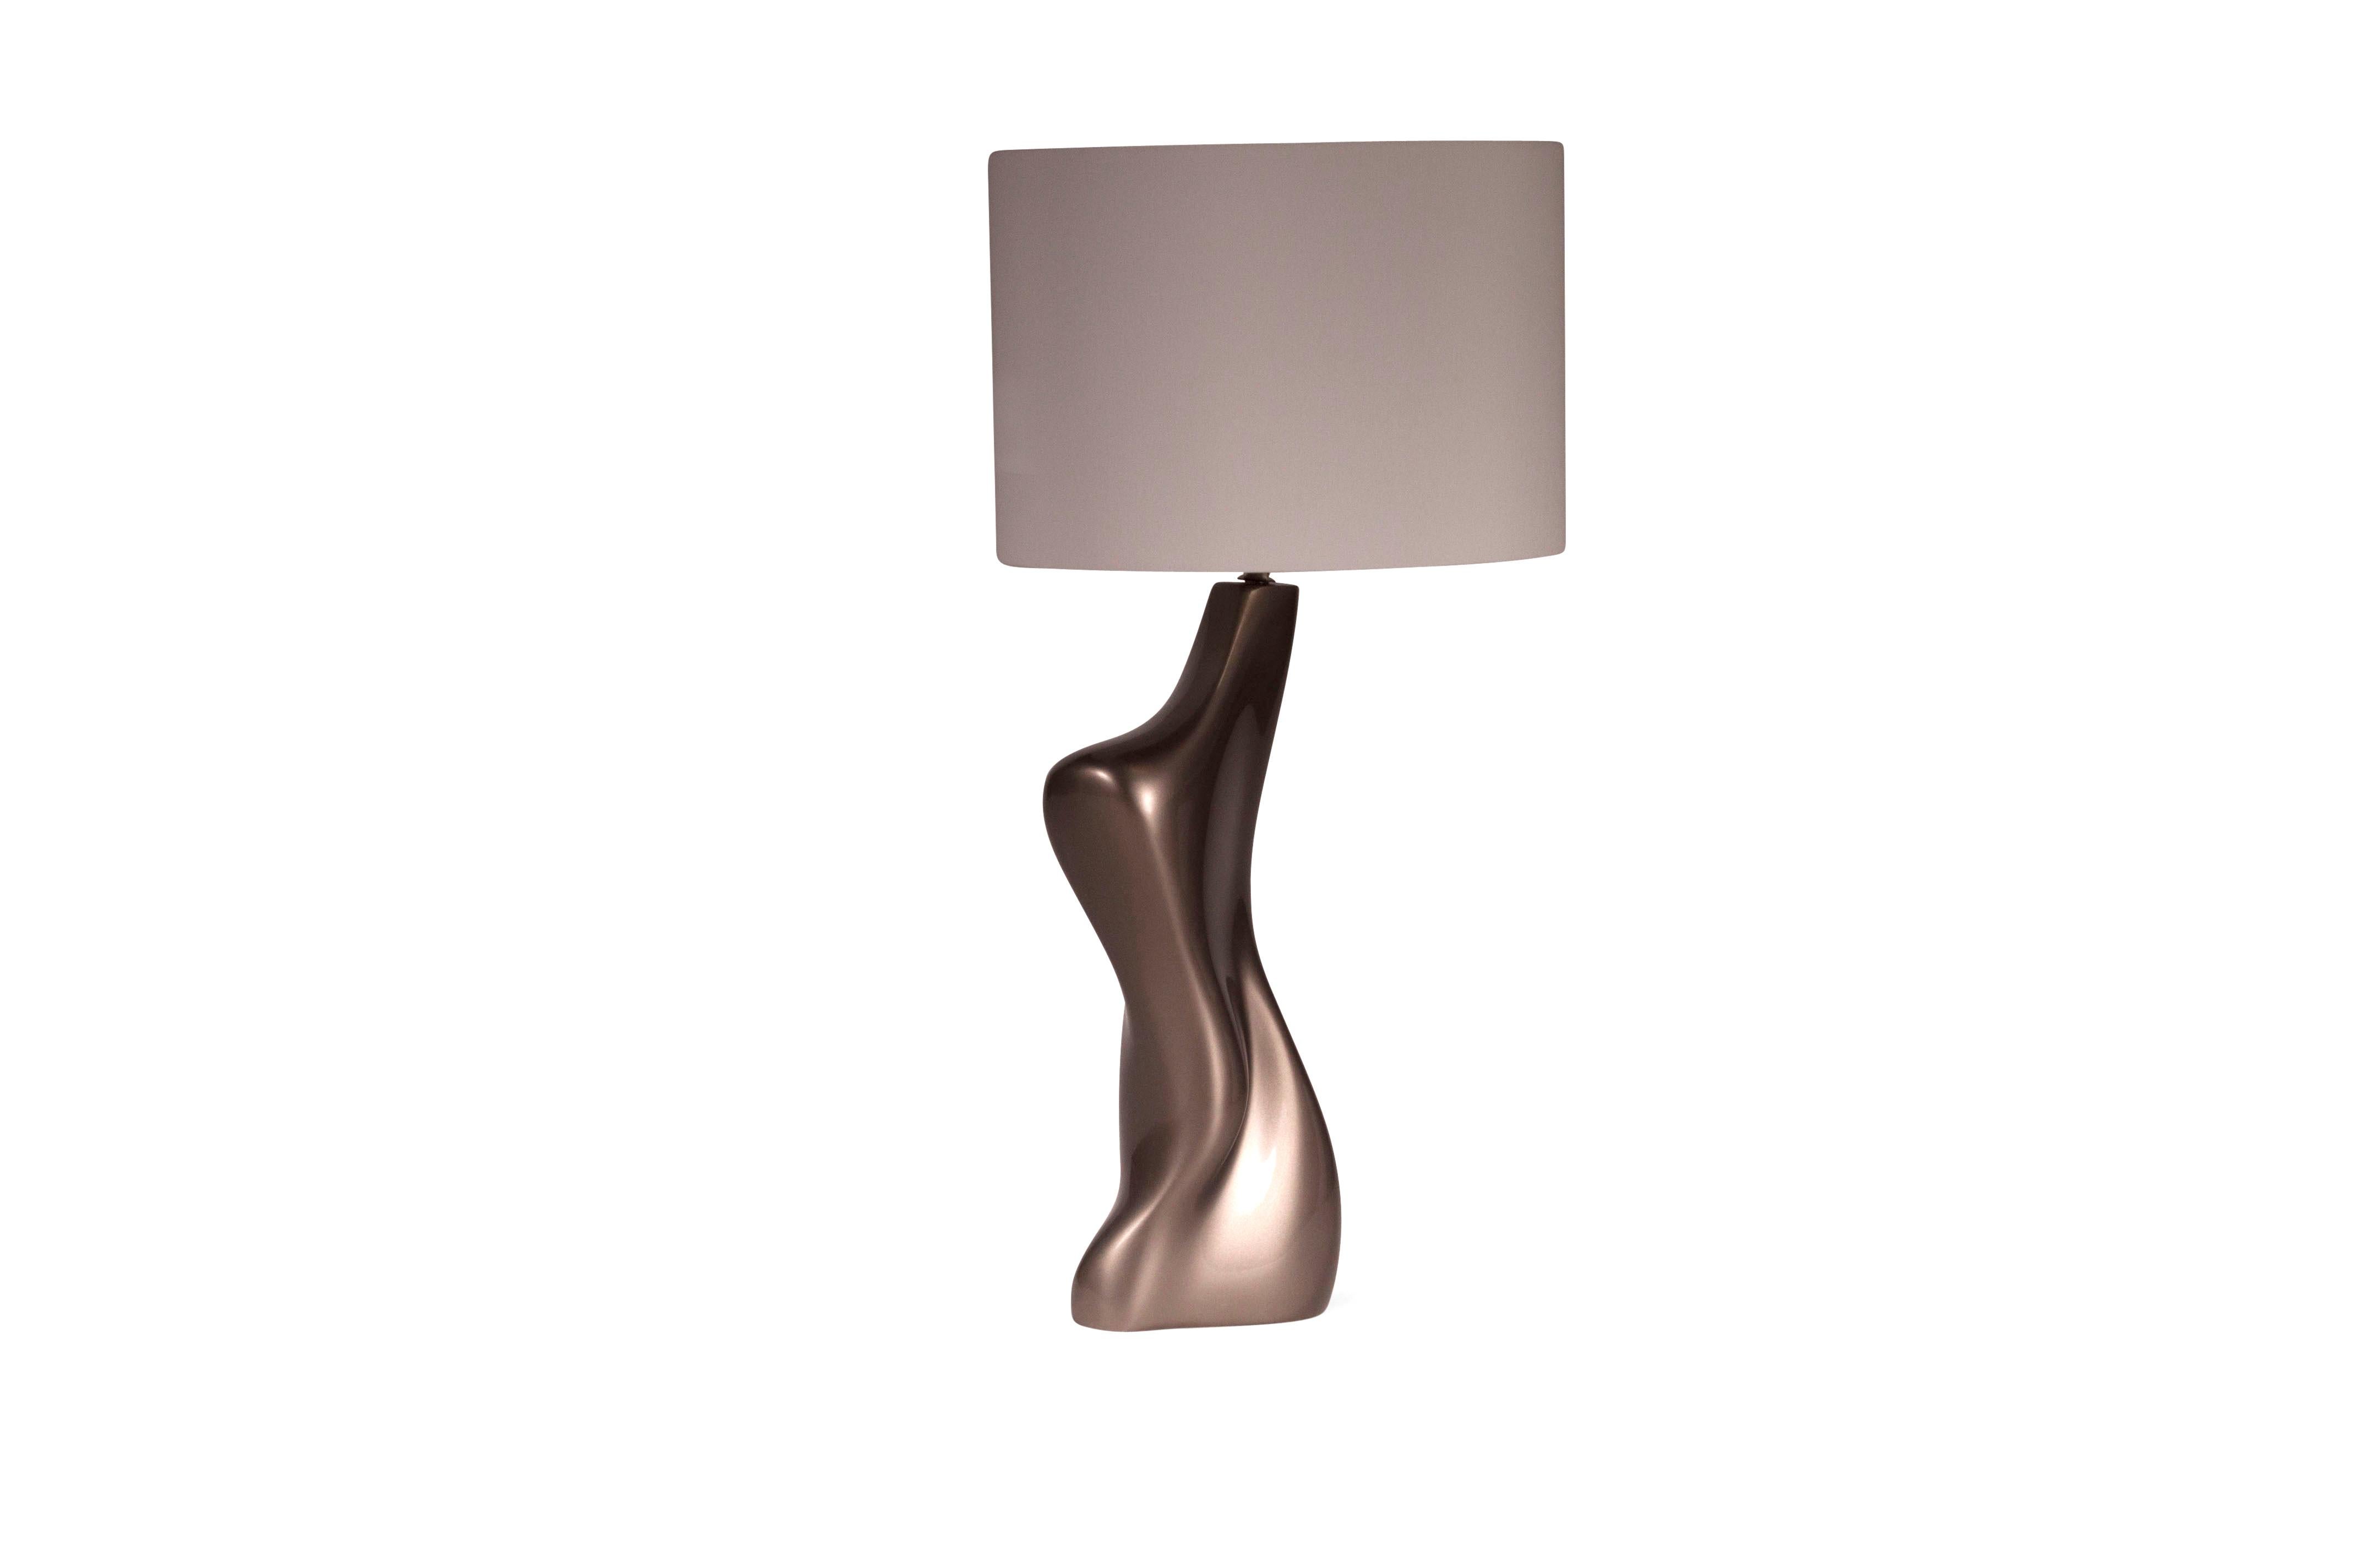 Helen table lamp is a organic shaped table lamp with metallic dark gold.
Dimension of the table lamp is 8